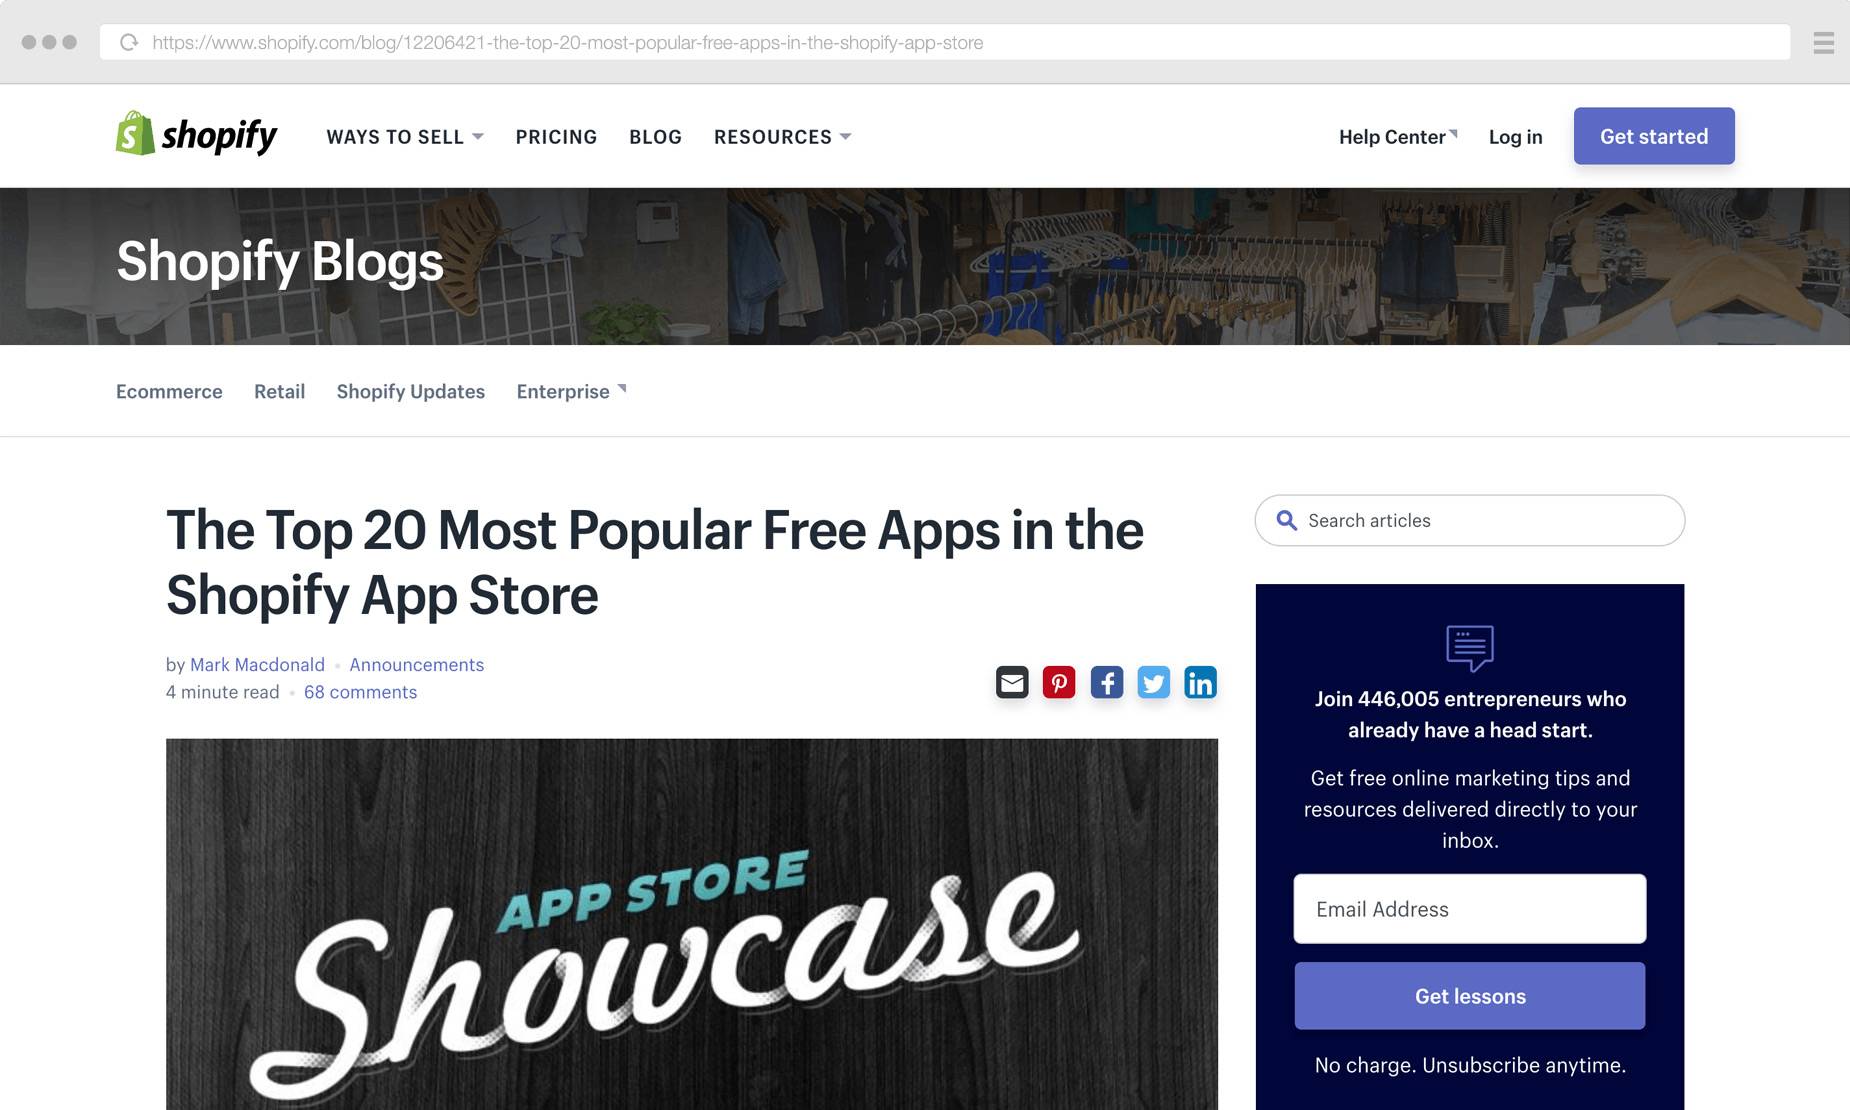 App Store Showcase Blog Post from Shopify Blogs